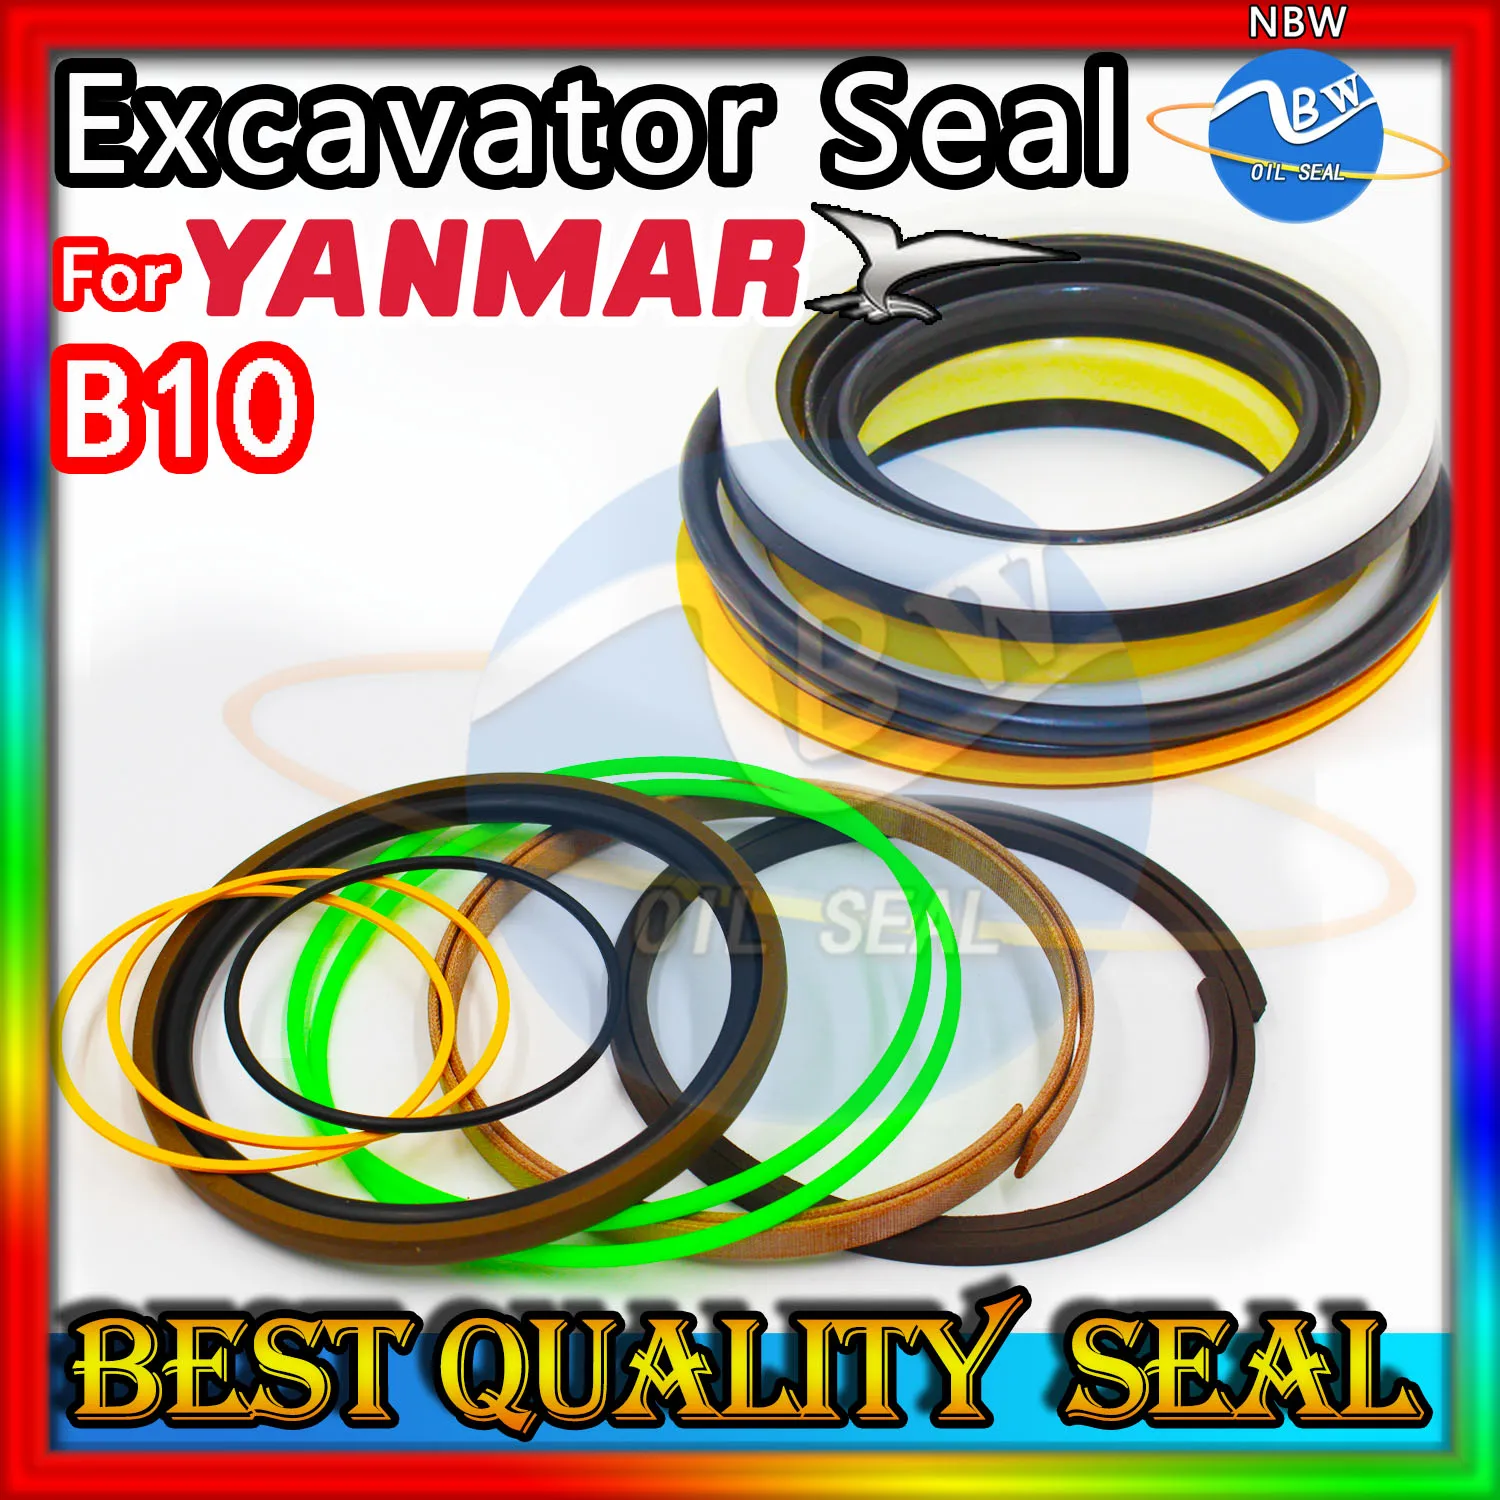 

For Yanmar B10 Excavator Oil Seal Kit High Quality Repair Gear Center Joint Gasket Nitrile NBR Nok Washer Skf Service Track Tool